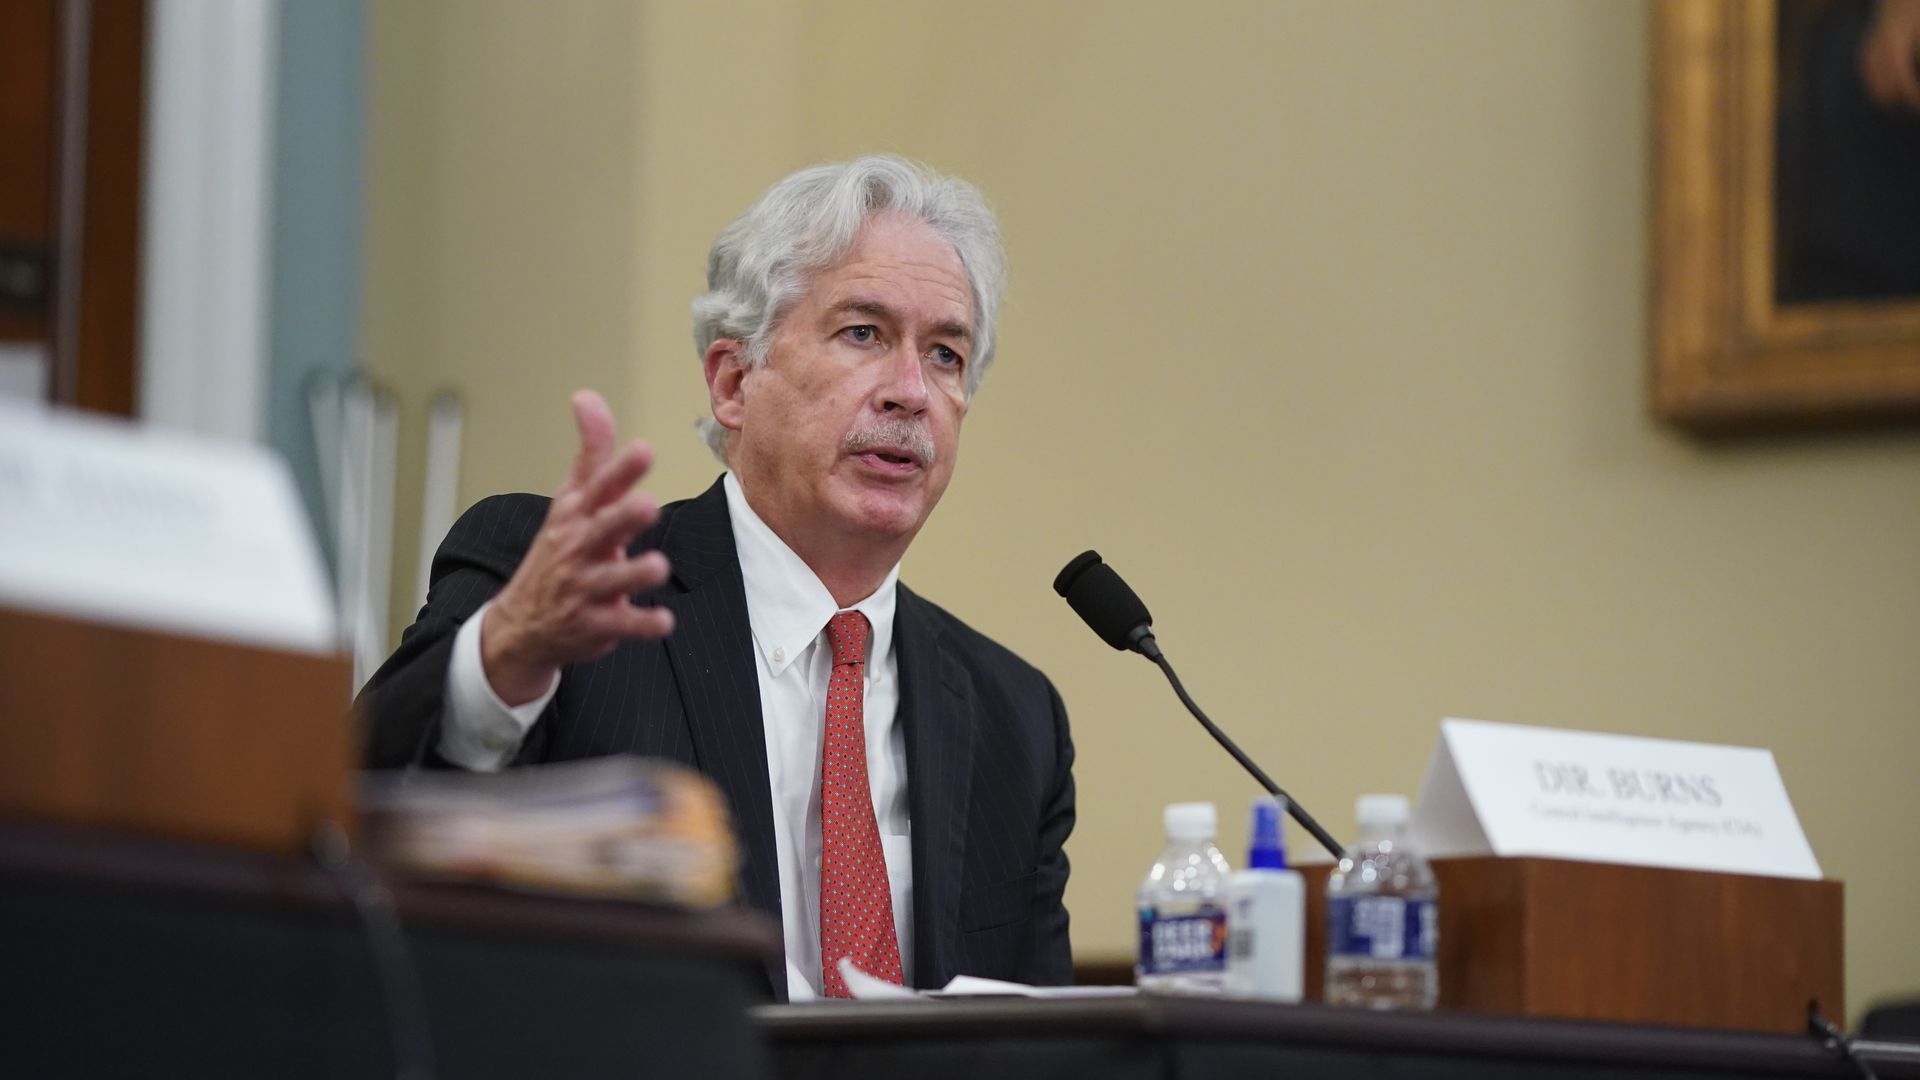  William Burns, director of the Central Intelligence Agency (CIA), speaks during a House Intelligence Committee hearing on April 15, 2021 in Washington, D.C.